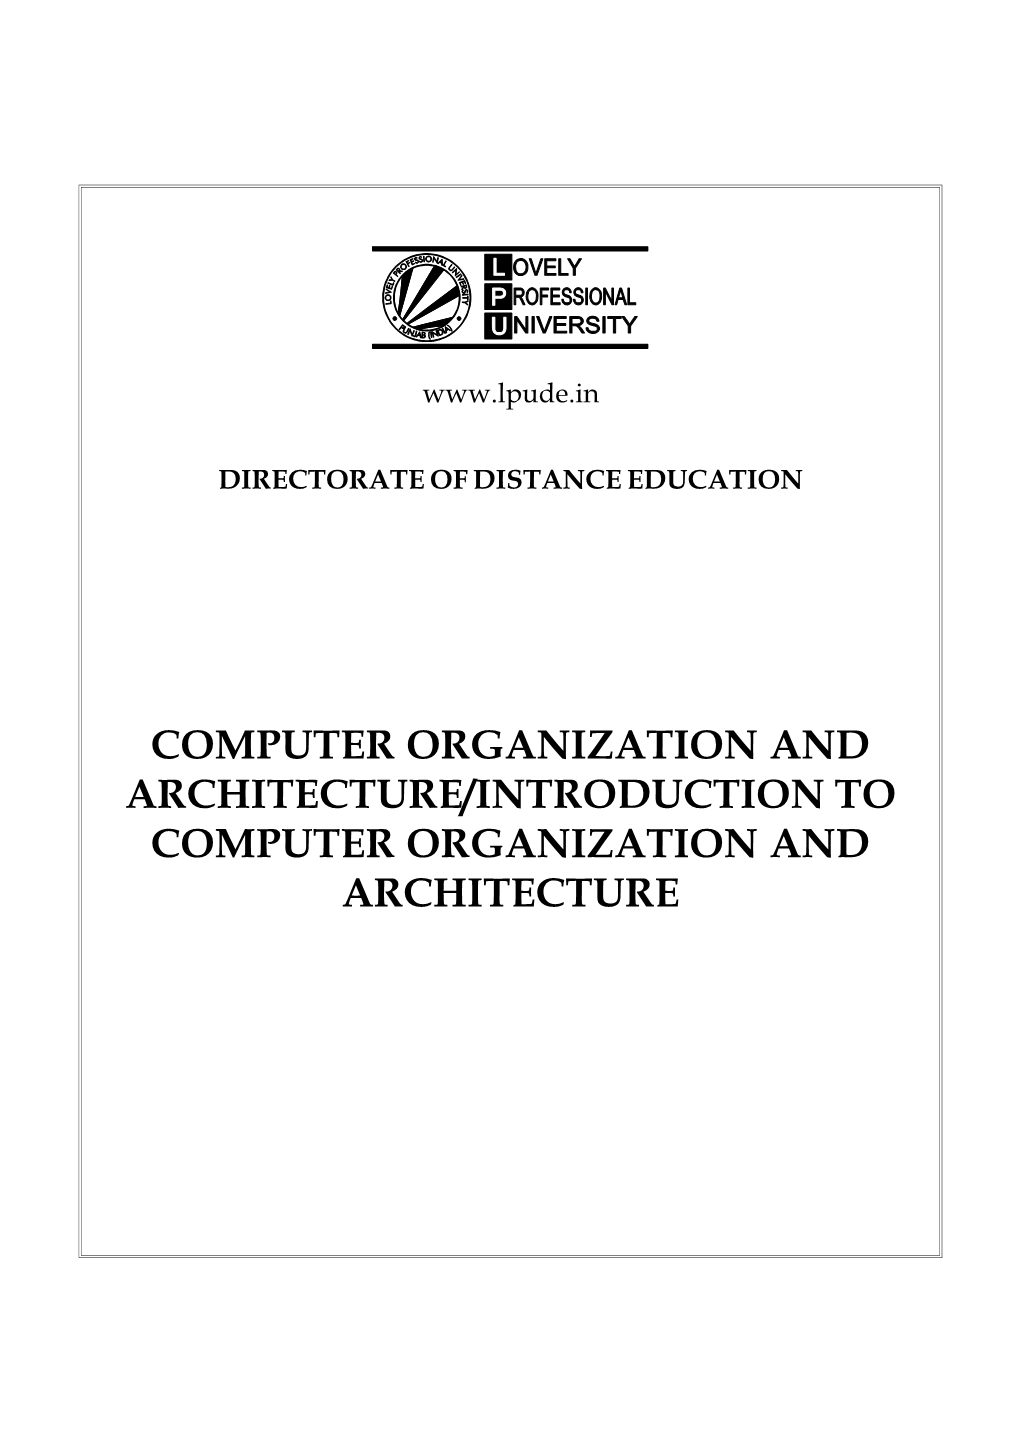 COMPUTER ORGANIZATION and ARCHITECTURE/INTRODUCTION to COMPUTER ORGANIZATION and ARCHITECTURE Copyright © 2012 Lovely Professional University All Rights Reserved